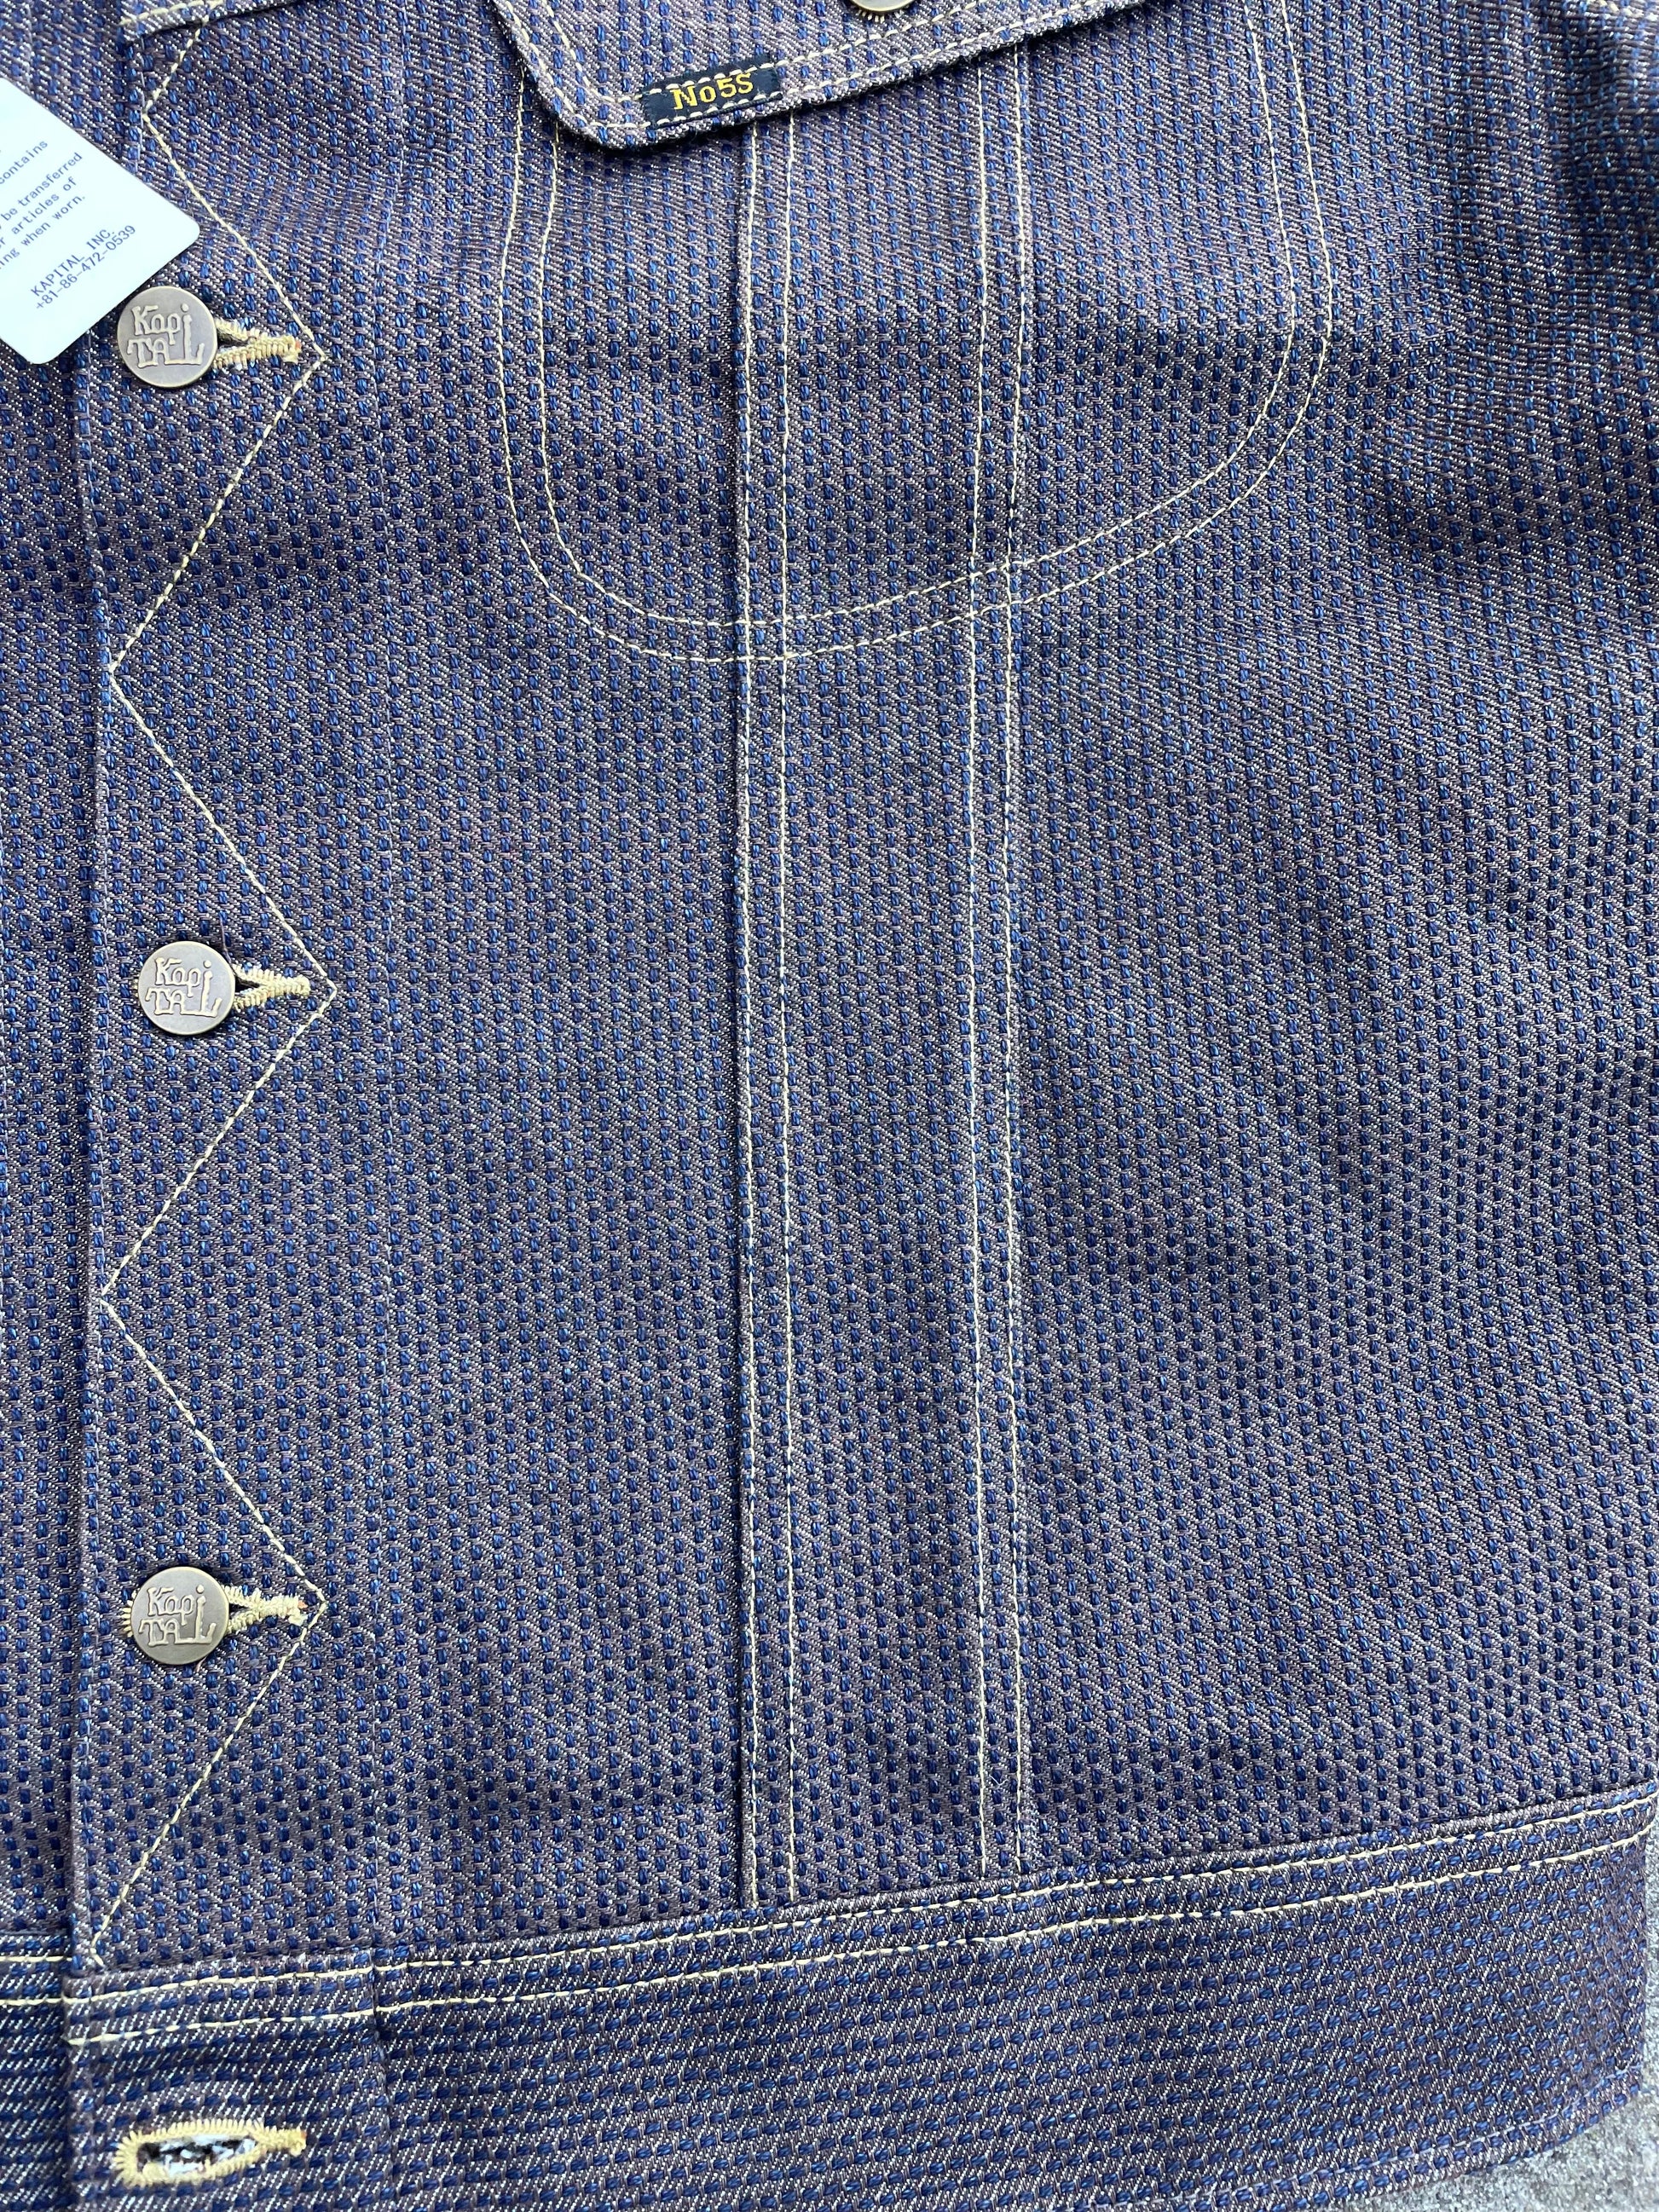 Close up shot of the texture of the jacket